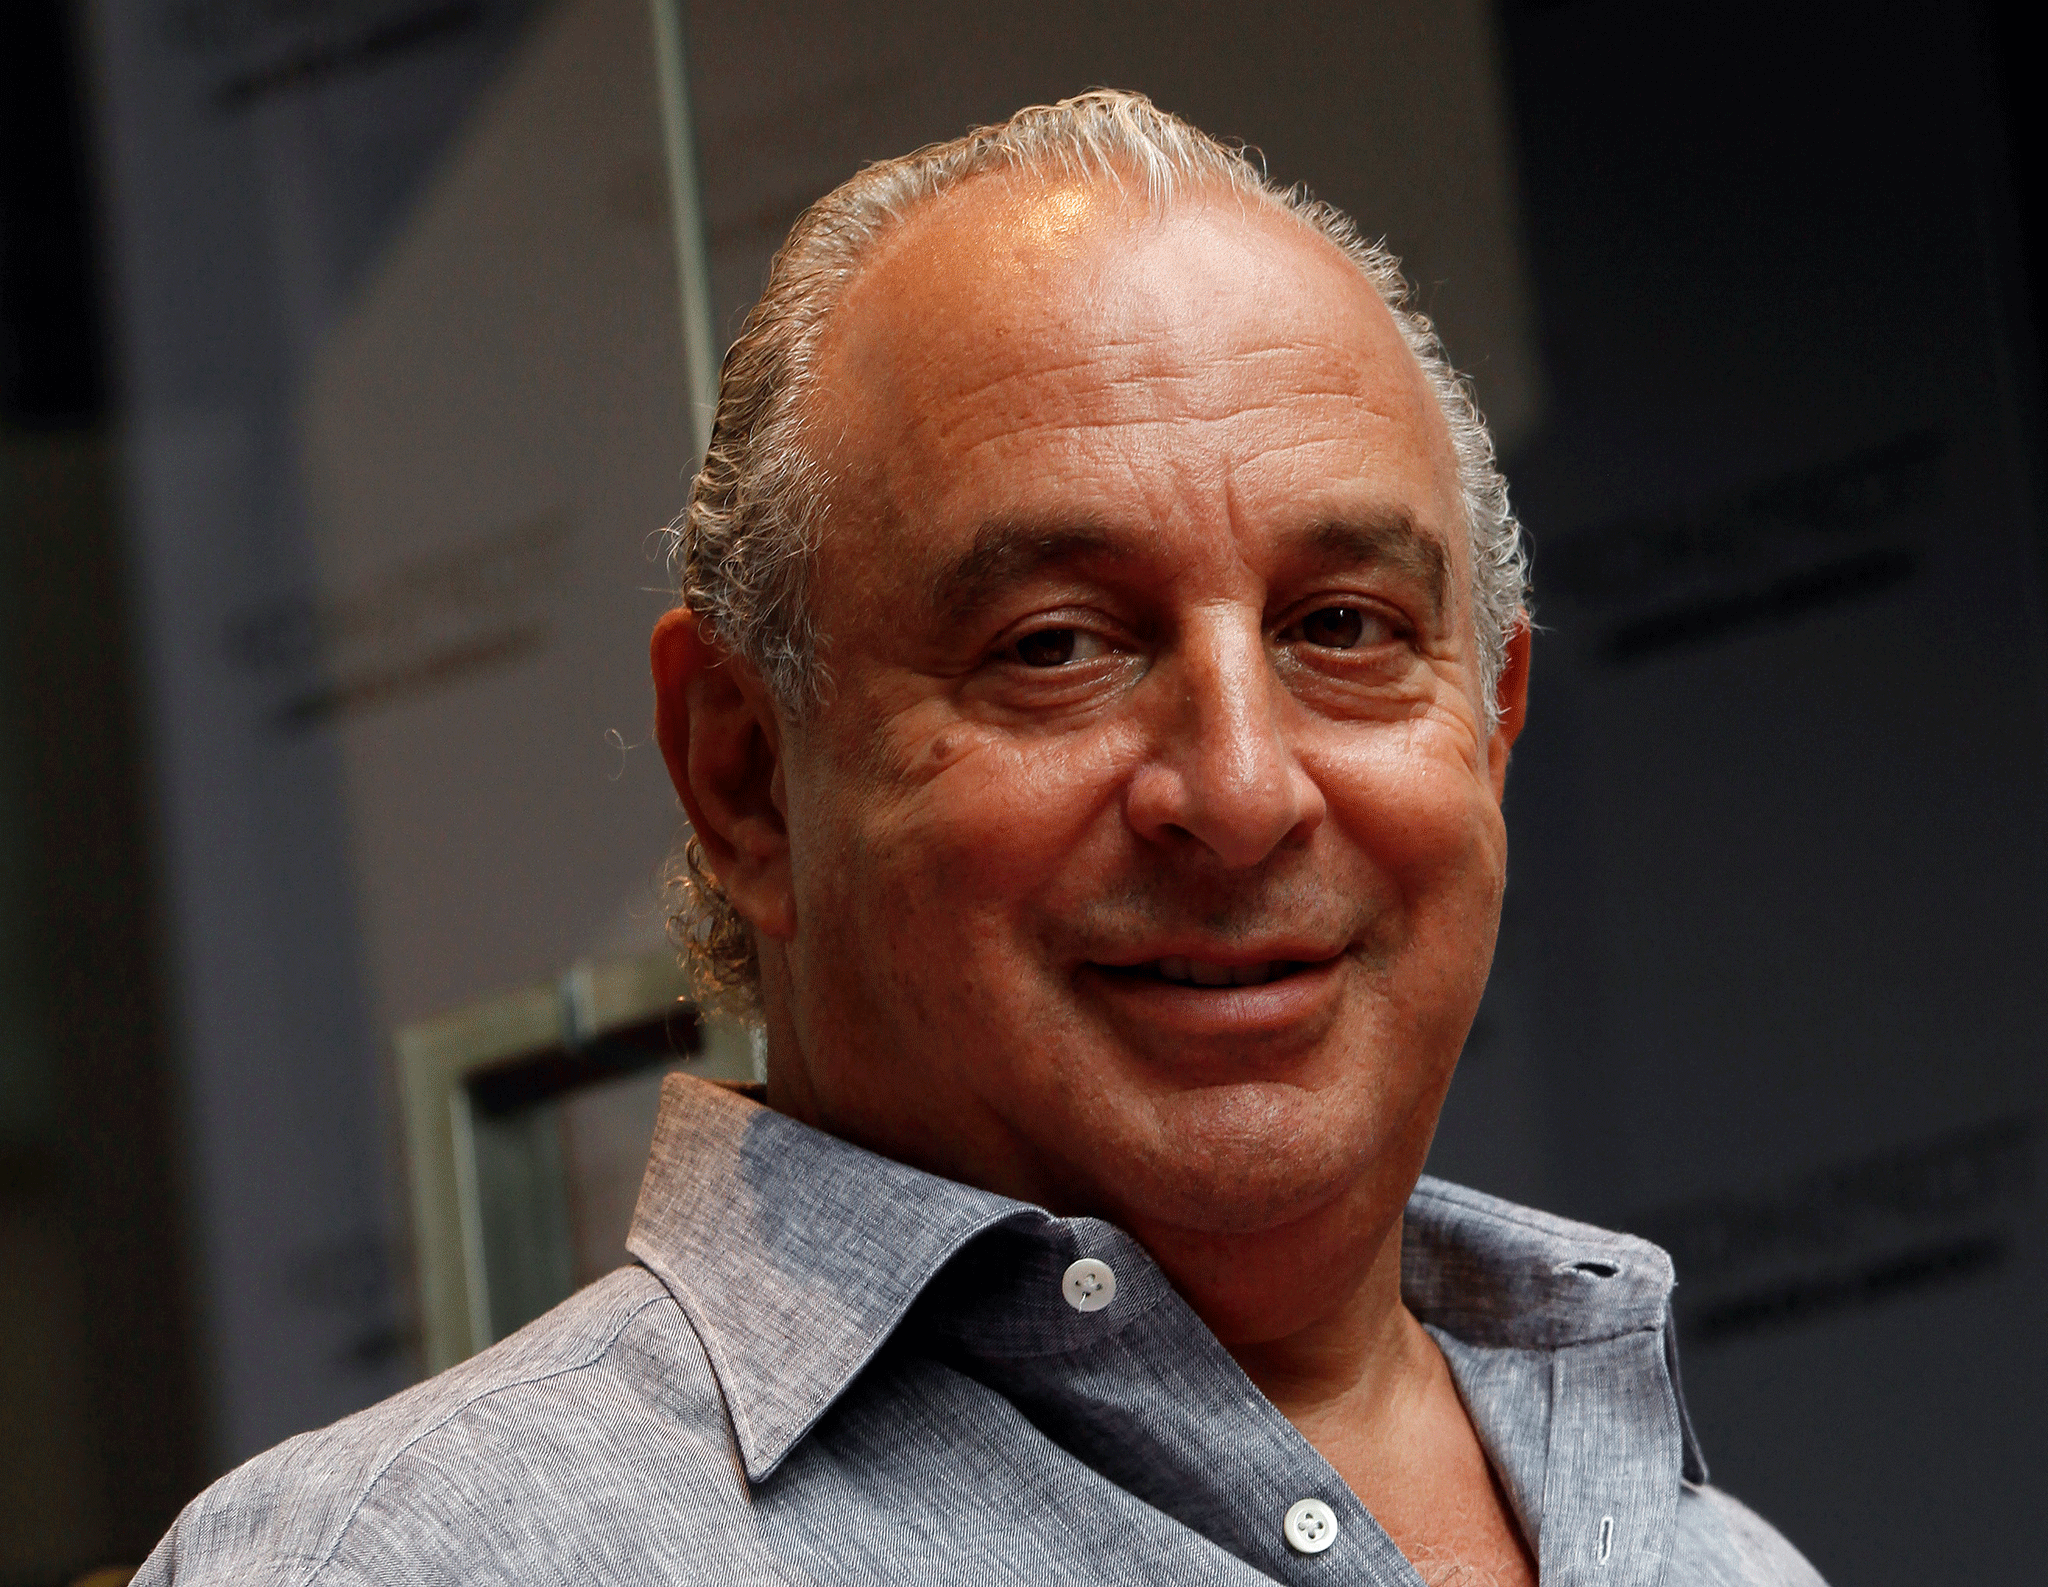 Sir Philip was honoured in 2006 for 'services to the retail industry' but has since been slammed for his role in the decline of BHS